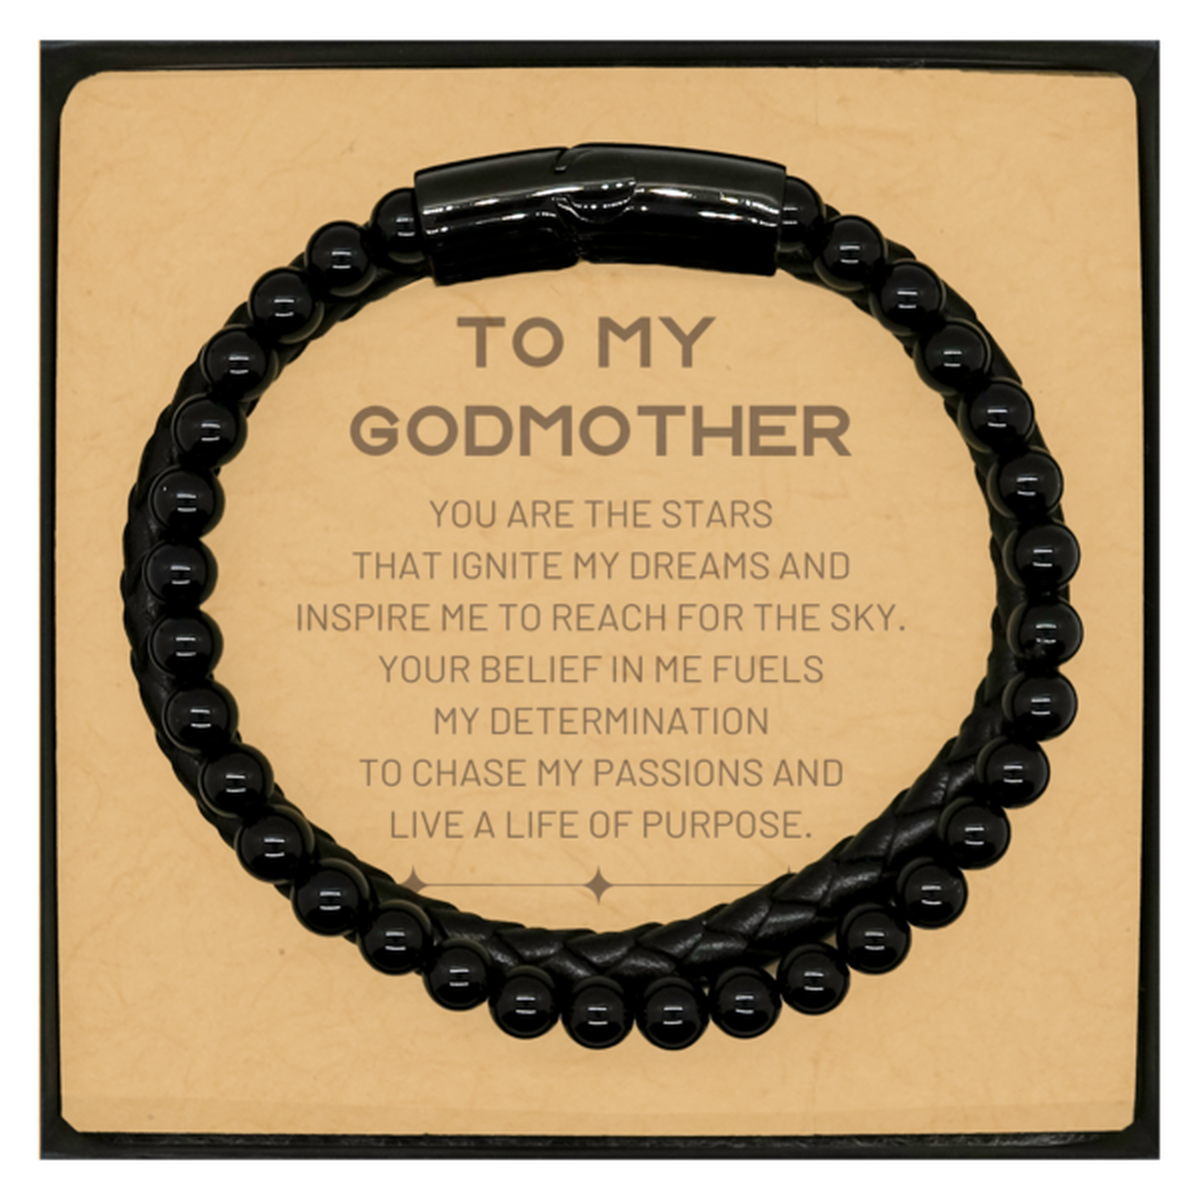 To My Godmother Stone Leather Bracelets, You are the stars that ignite my dreams and inspire me to reach for the sky, Birthday Christmas Unique Gifts For Godmother, Thank You Gifts For Godmother